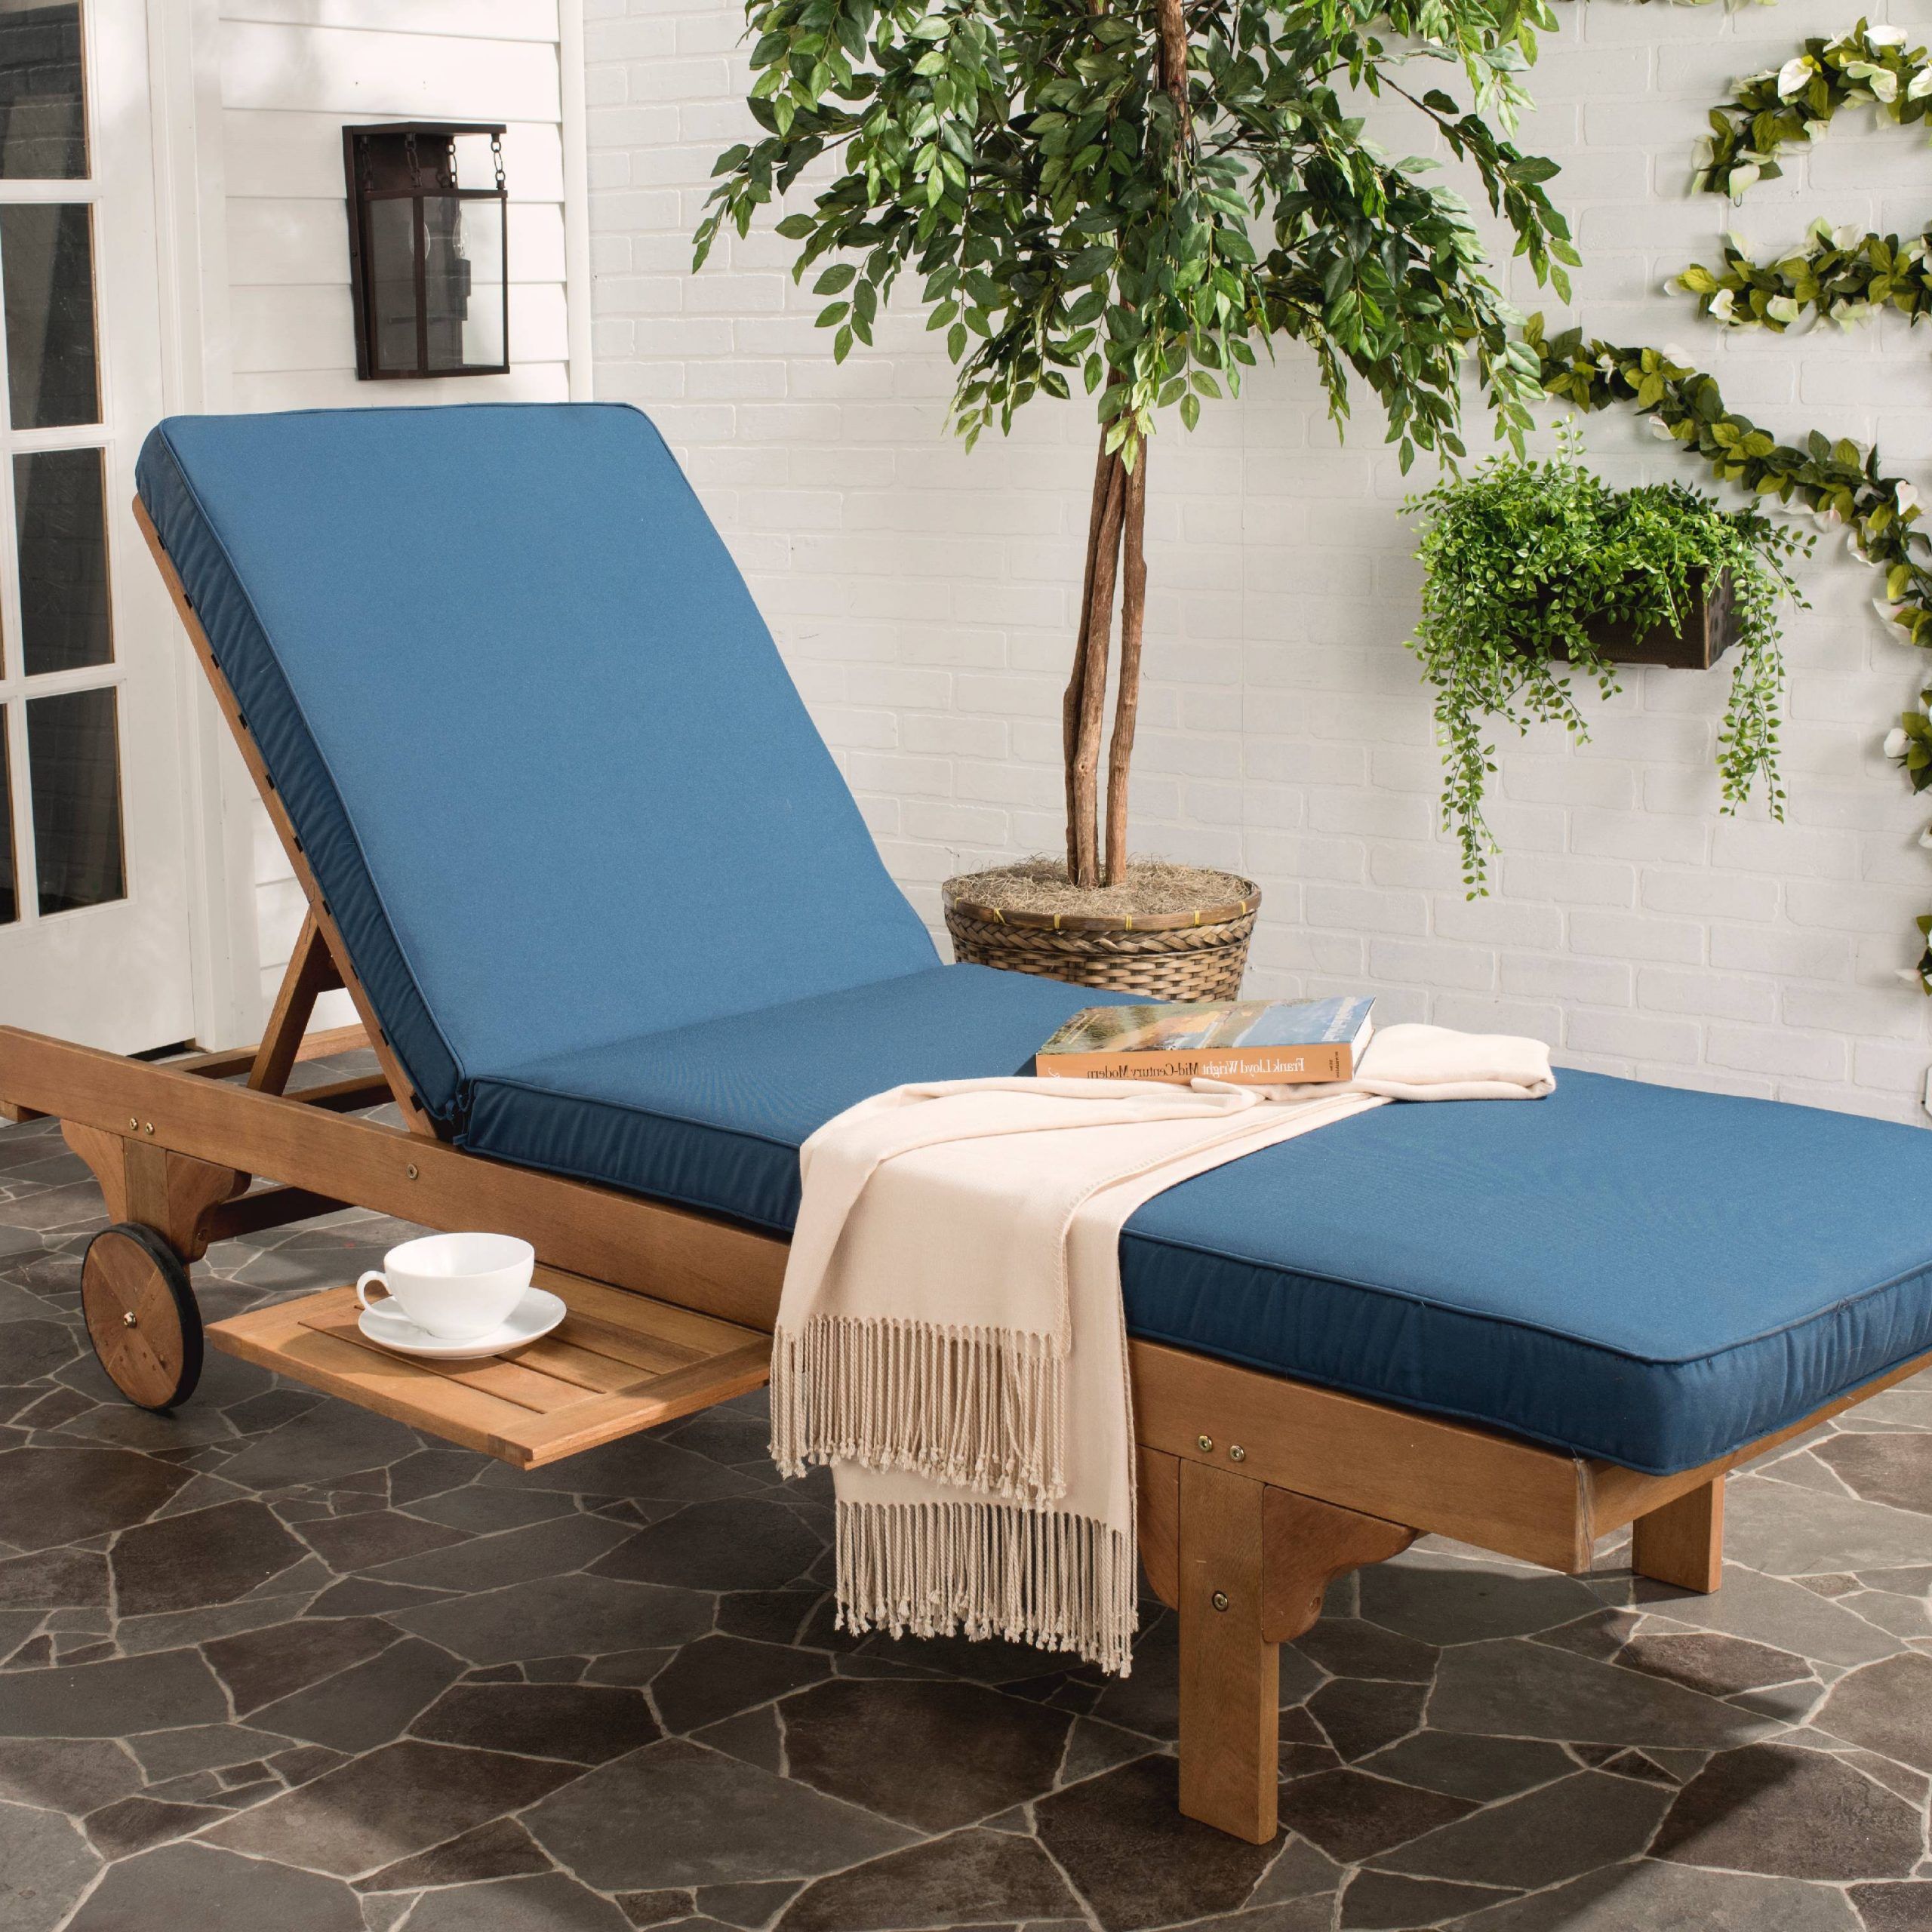 Safavieh Newport Outdoor Modern Chaise Lounge Chair With Cushion Regarding Current Natural Wood Outdoor Lounger Chairs (View 9 of 15)